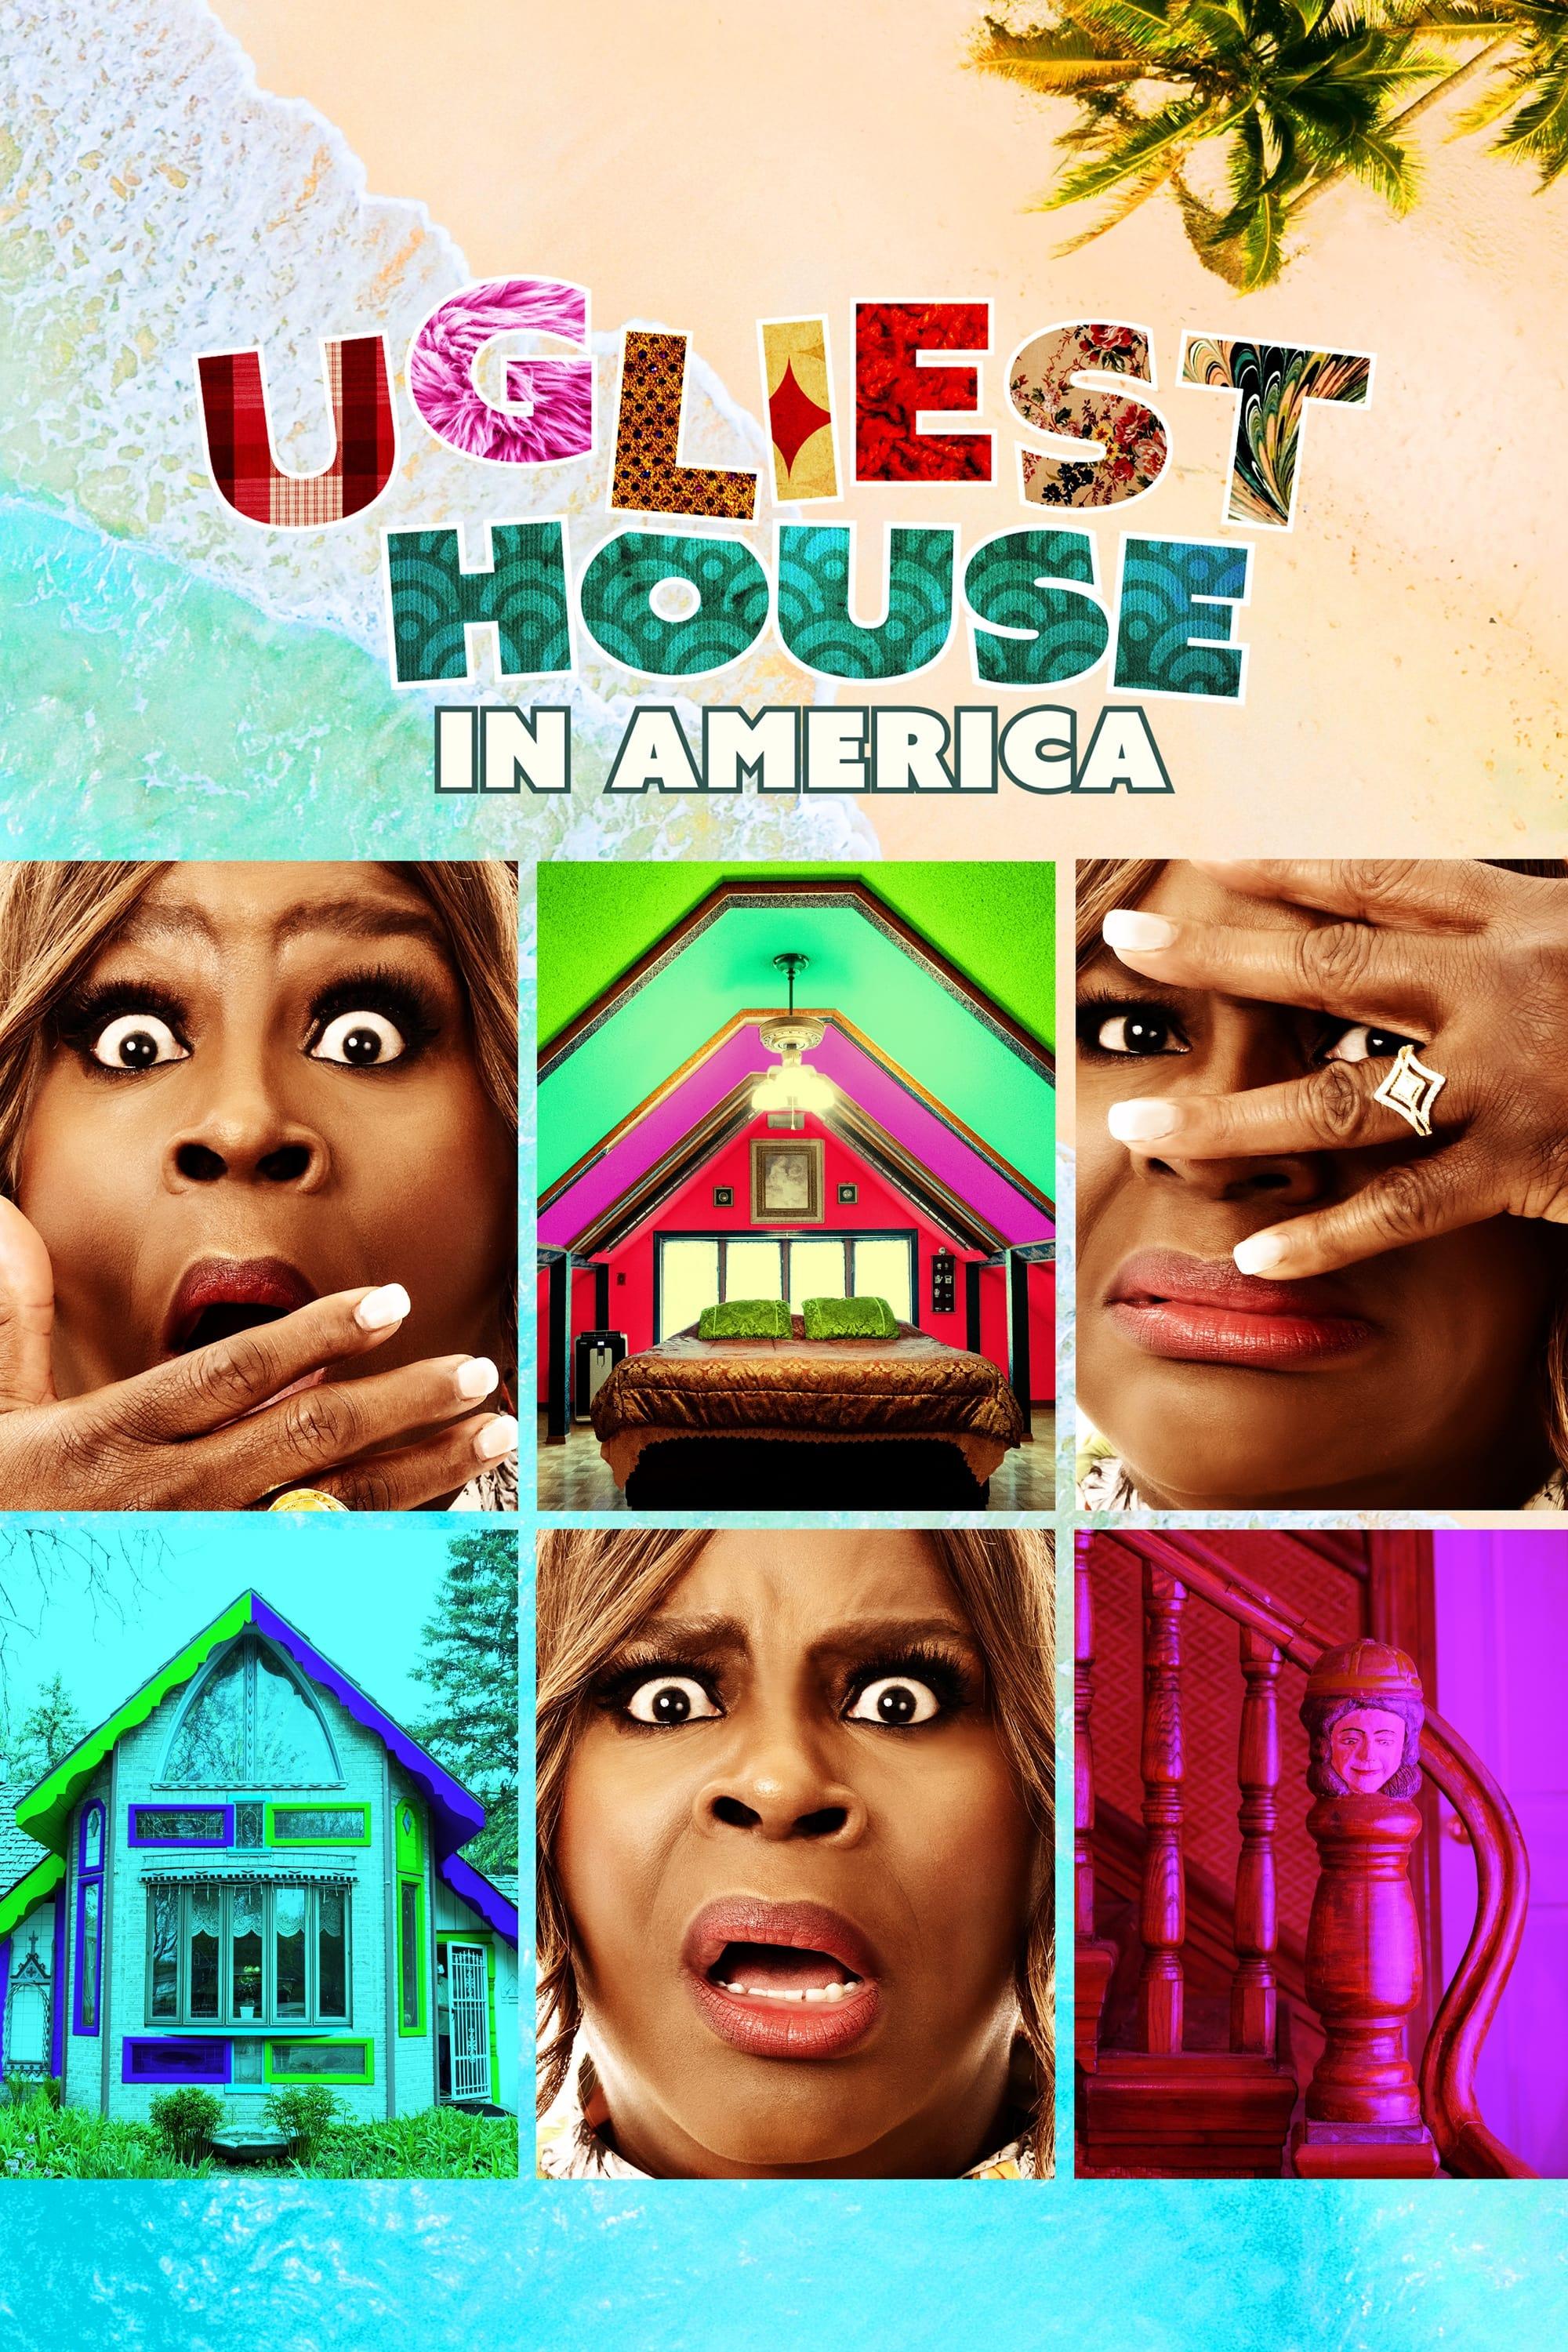 Ugliest House in America poster